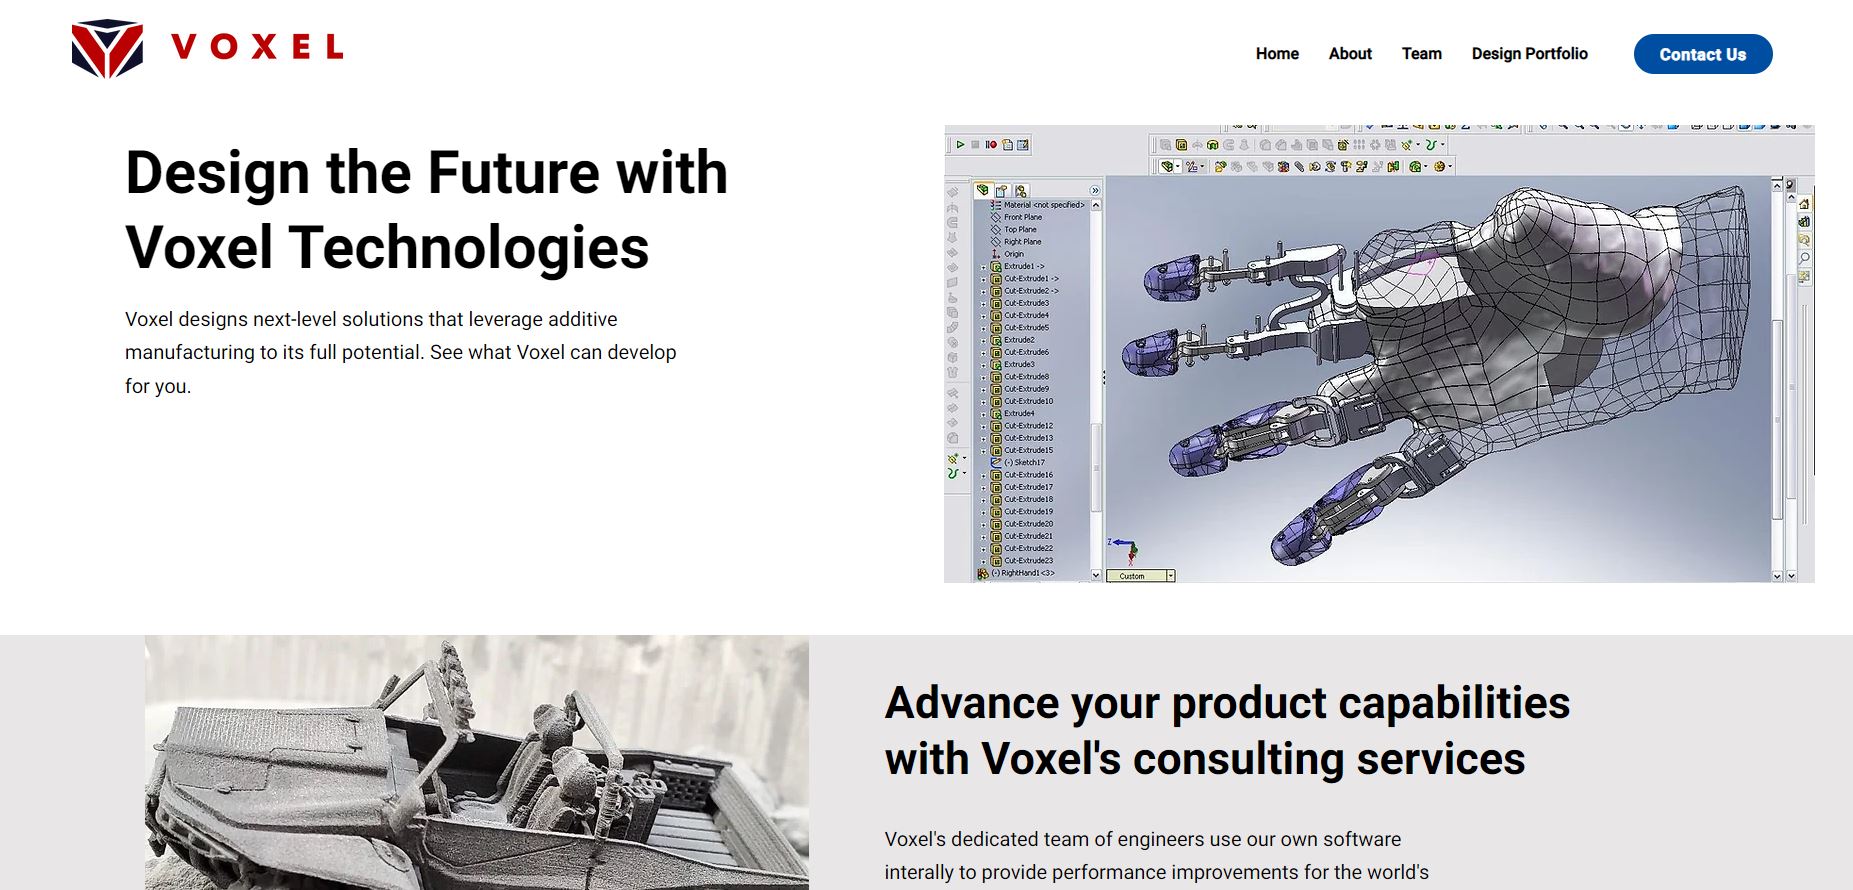 With an impressive seed funding of $1.7 million, Voxel Technologies is based in the vibrant city of Cincinnati, Ohio